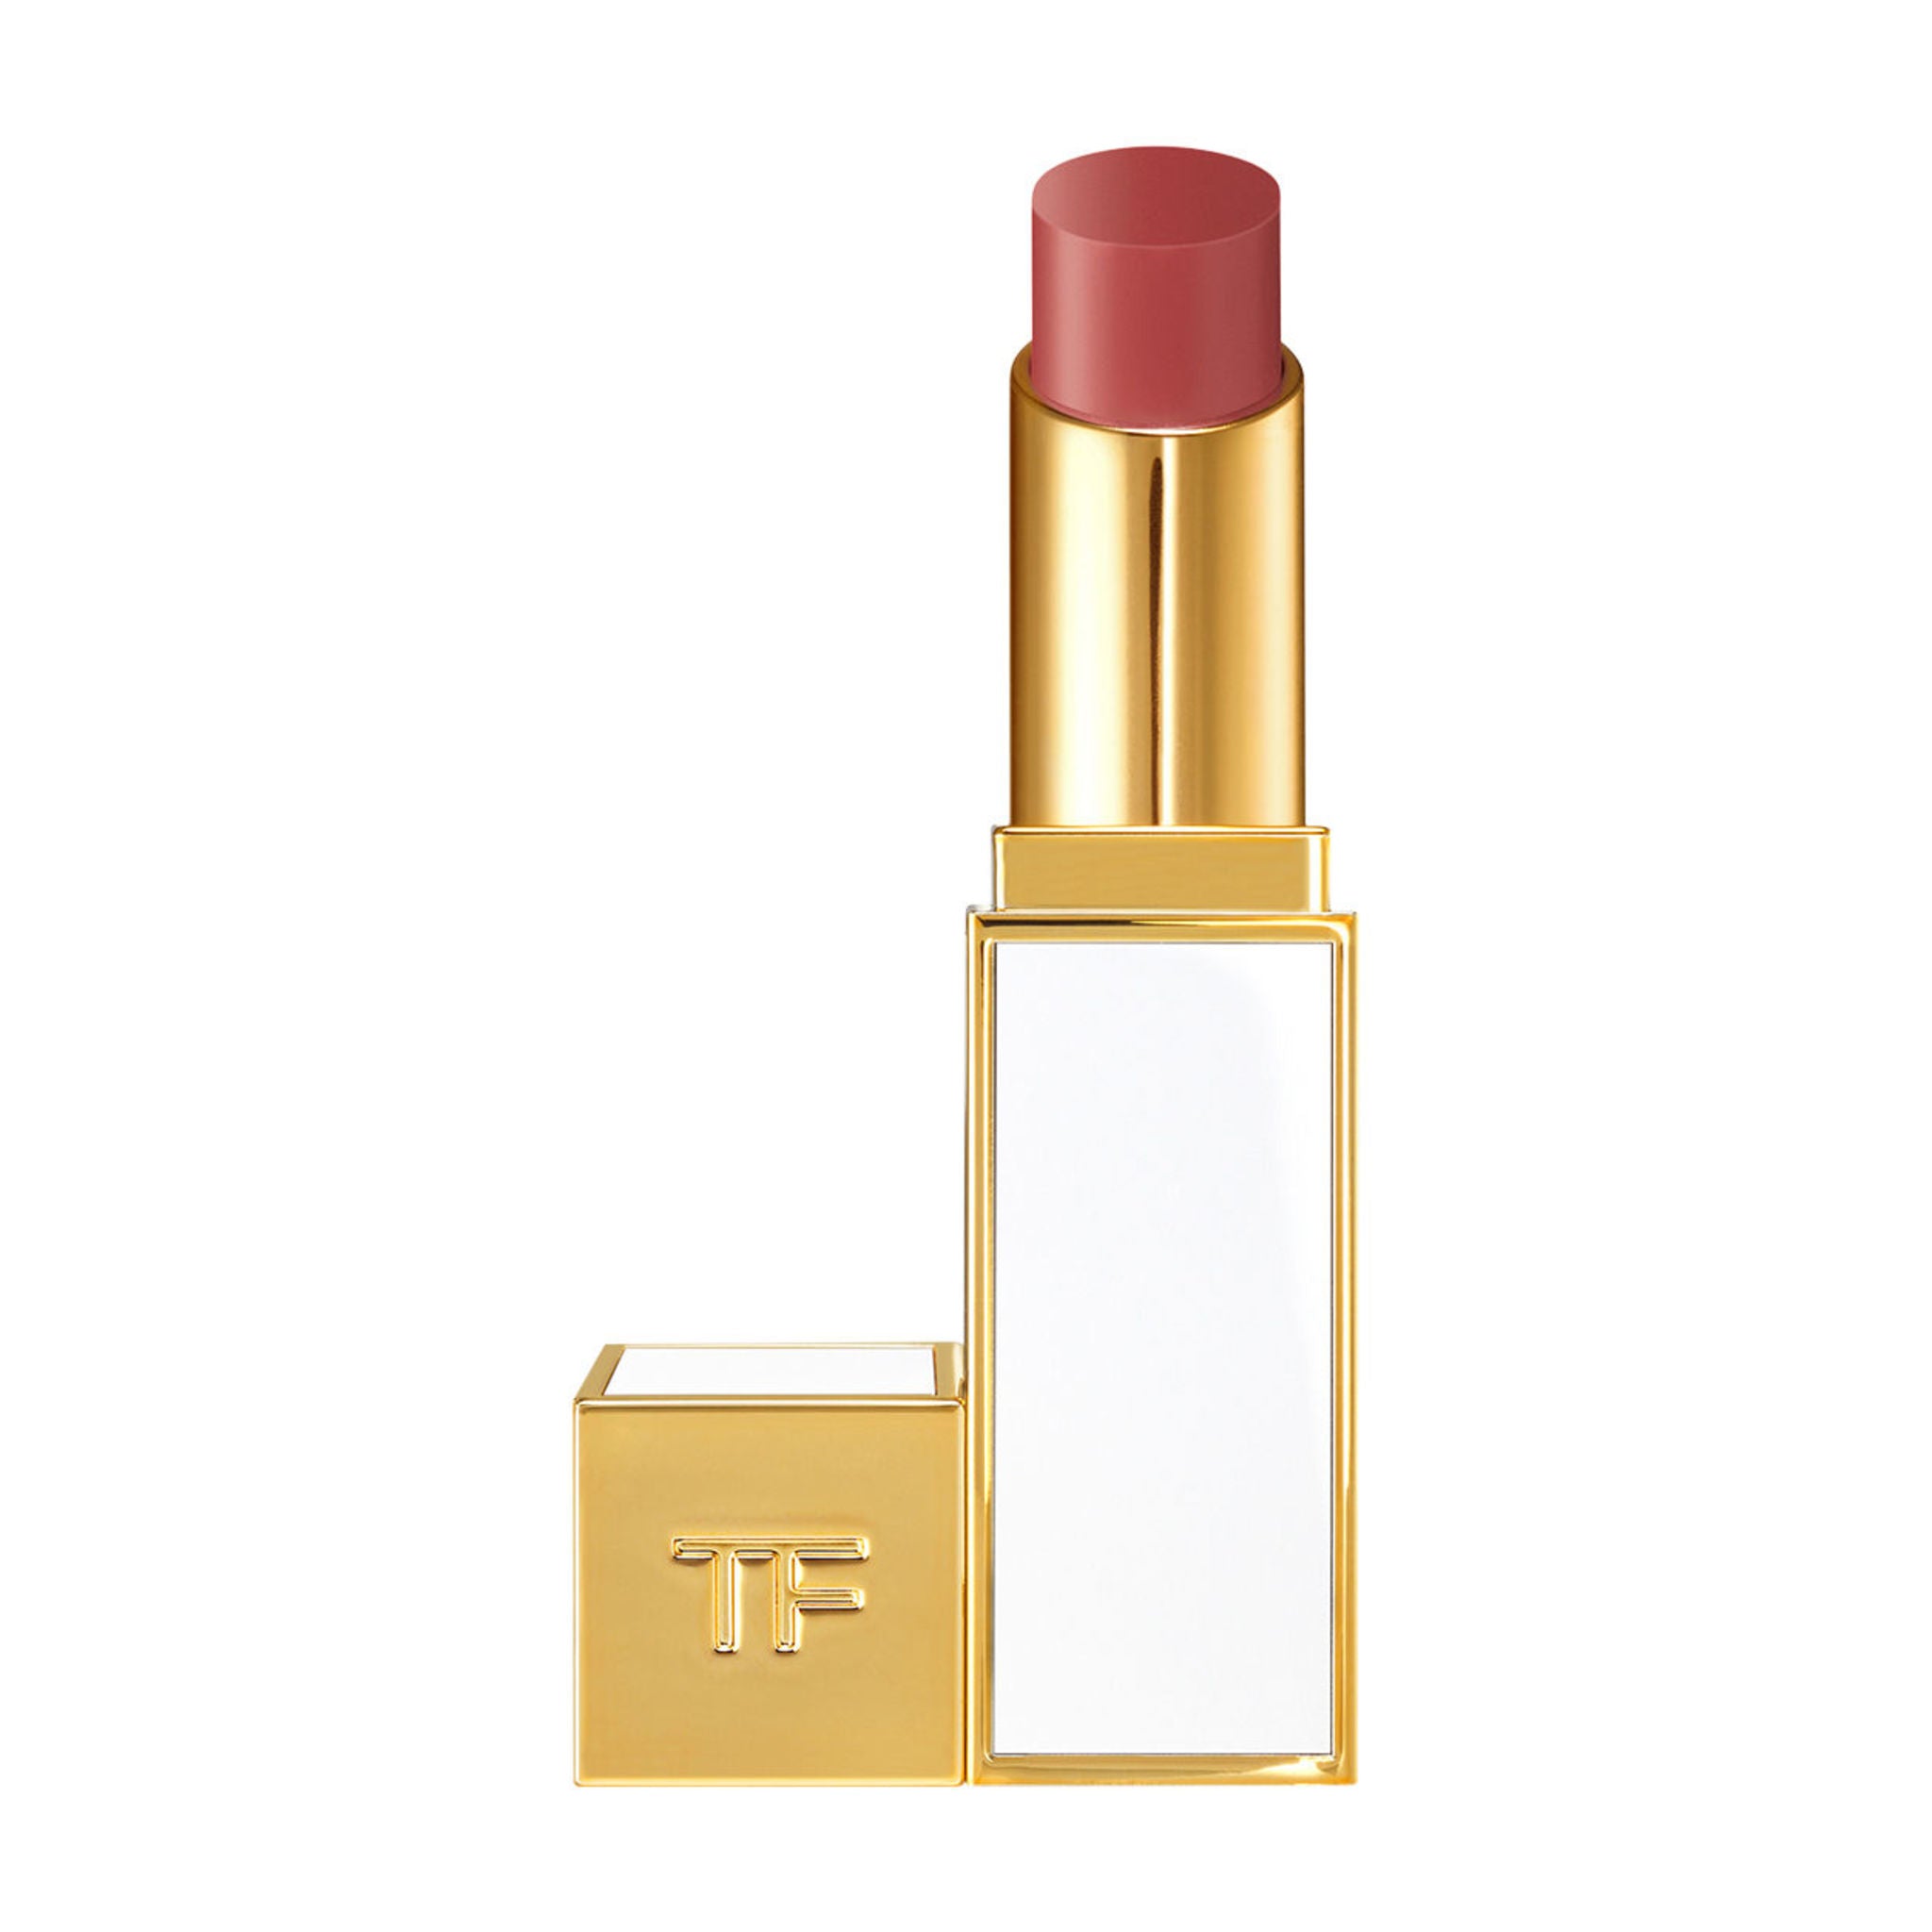 Tom Ford Ultra-Shine Lip Color Color/Shade variant: Nubile main image. This product is in the color pink